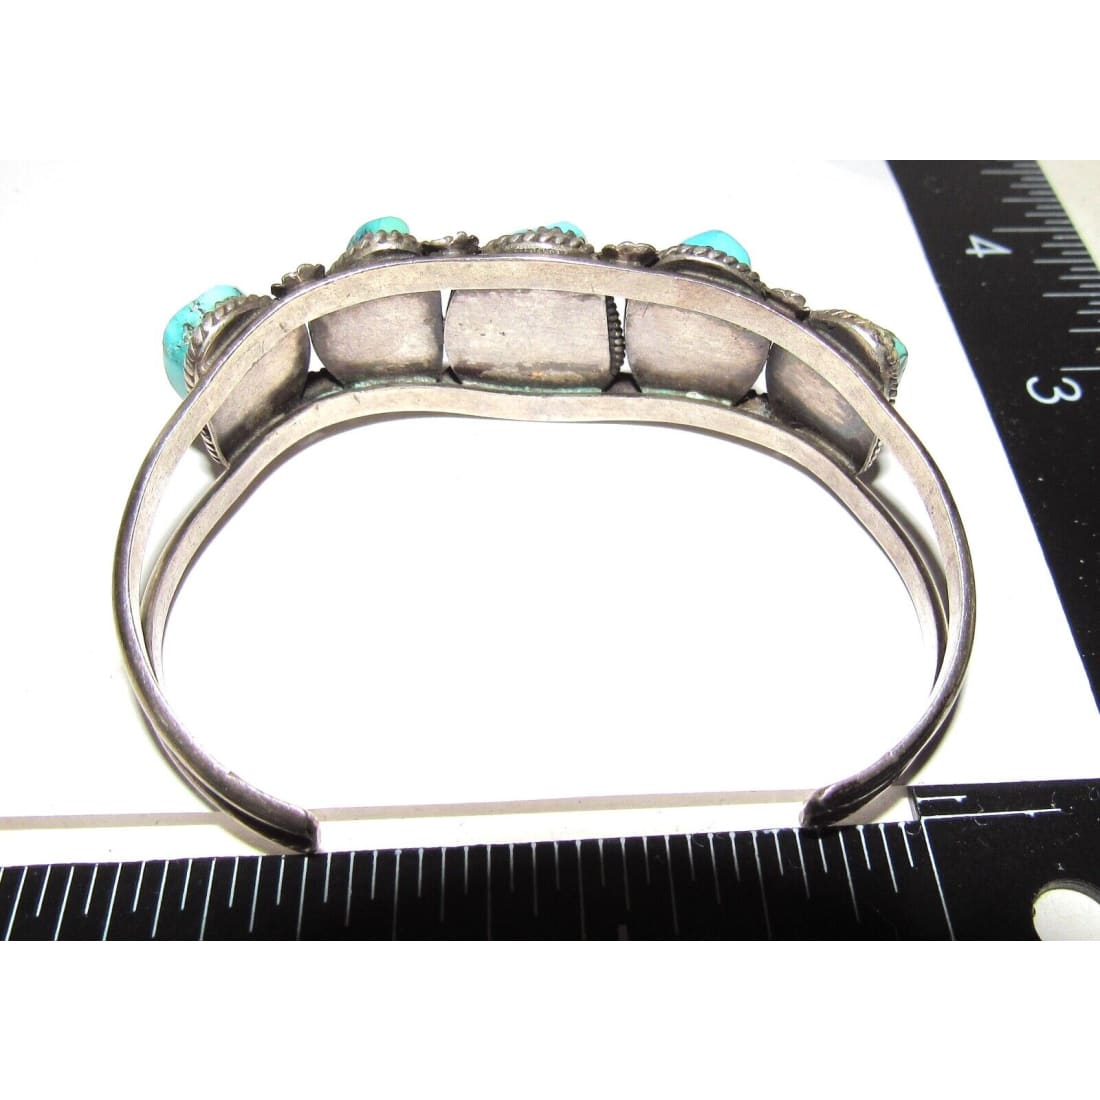 Old Pawn Navajo Turquoise Cuff Bracelet Sterling Silver